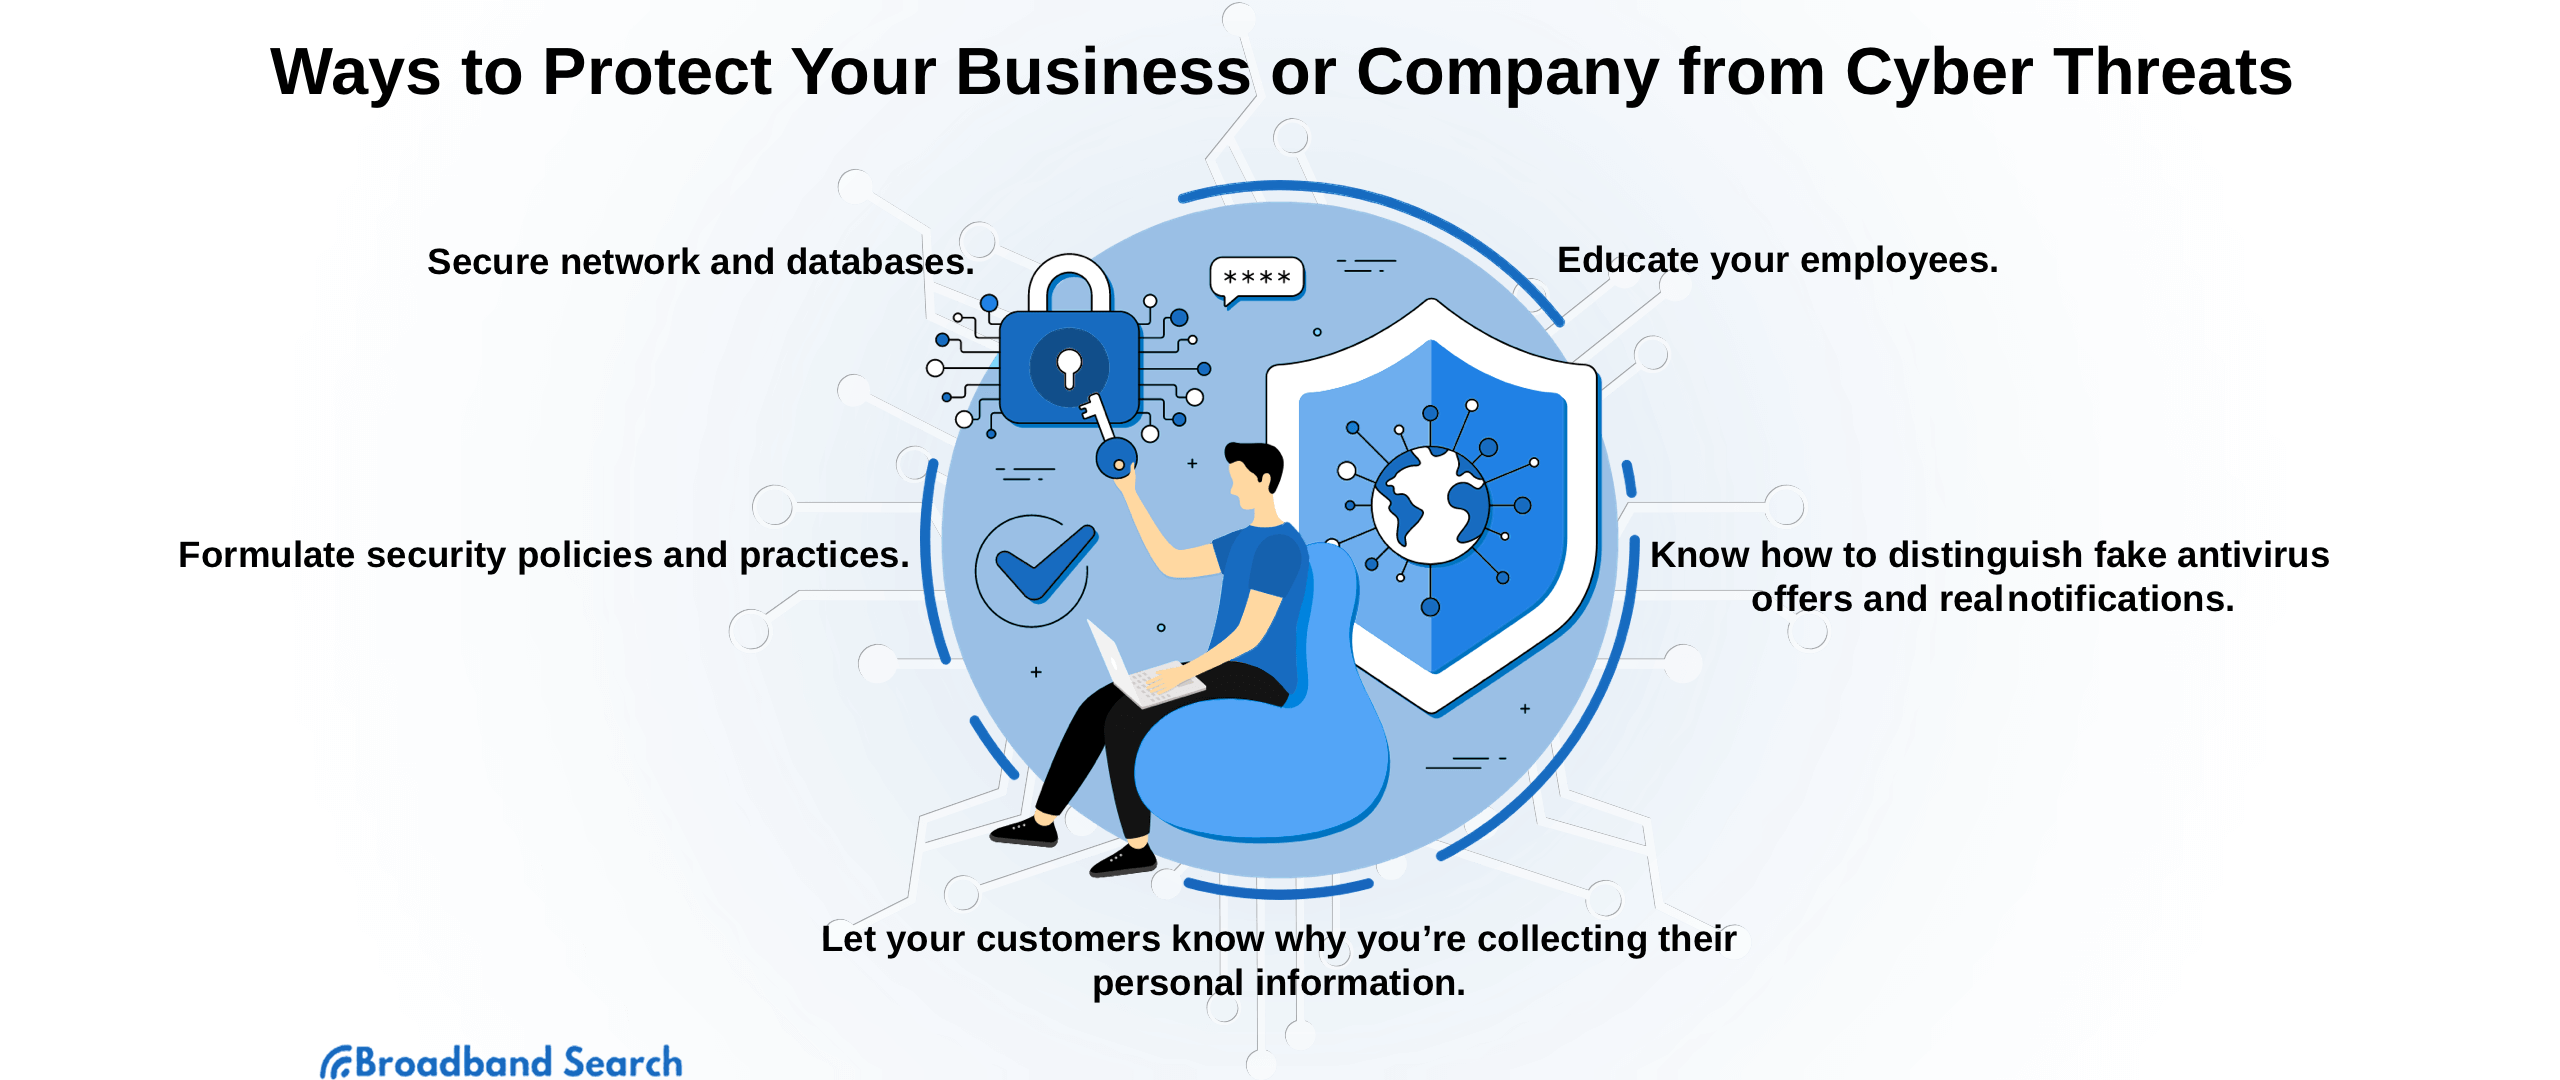 Why Online Security Services Are Important for Individuals, Small Businesses, and Large Corporations